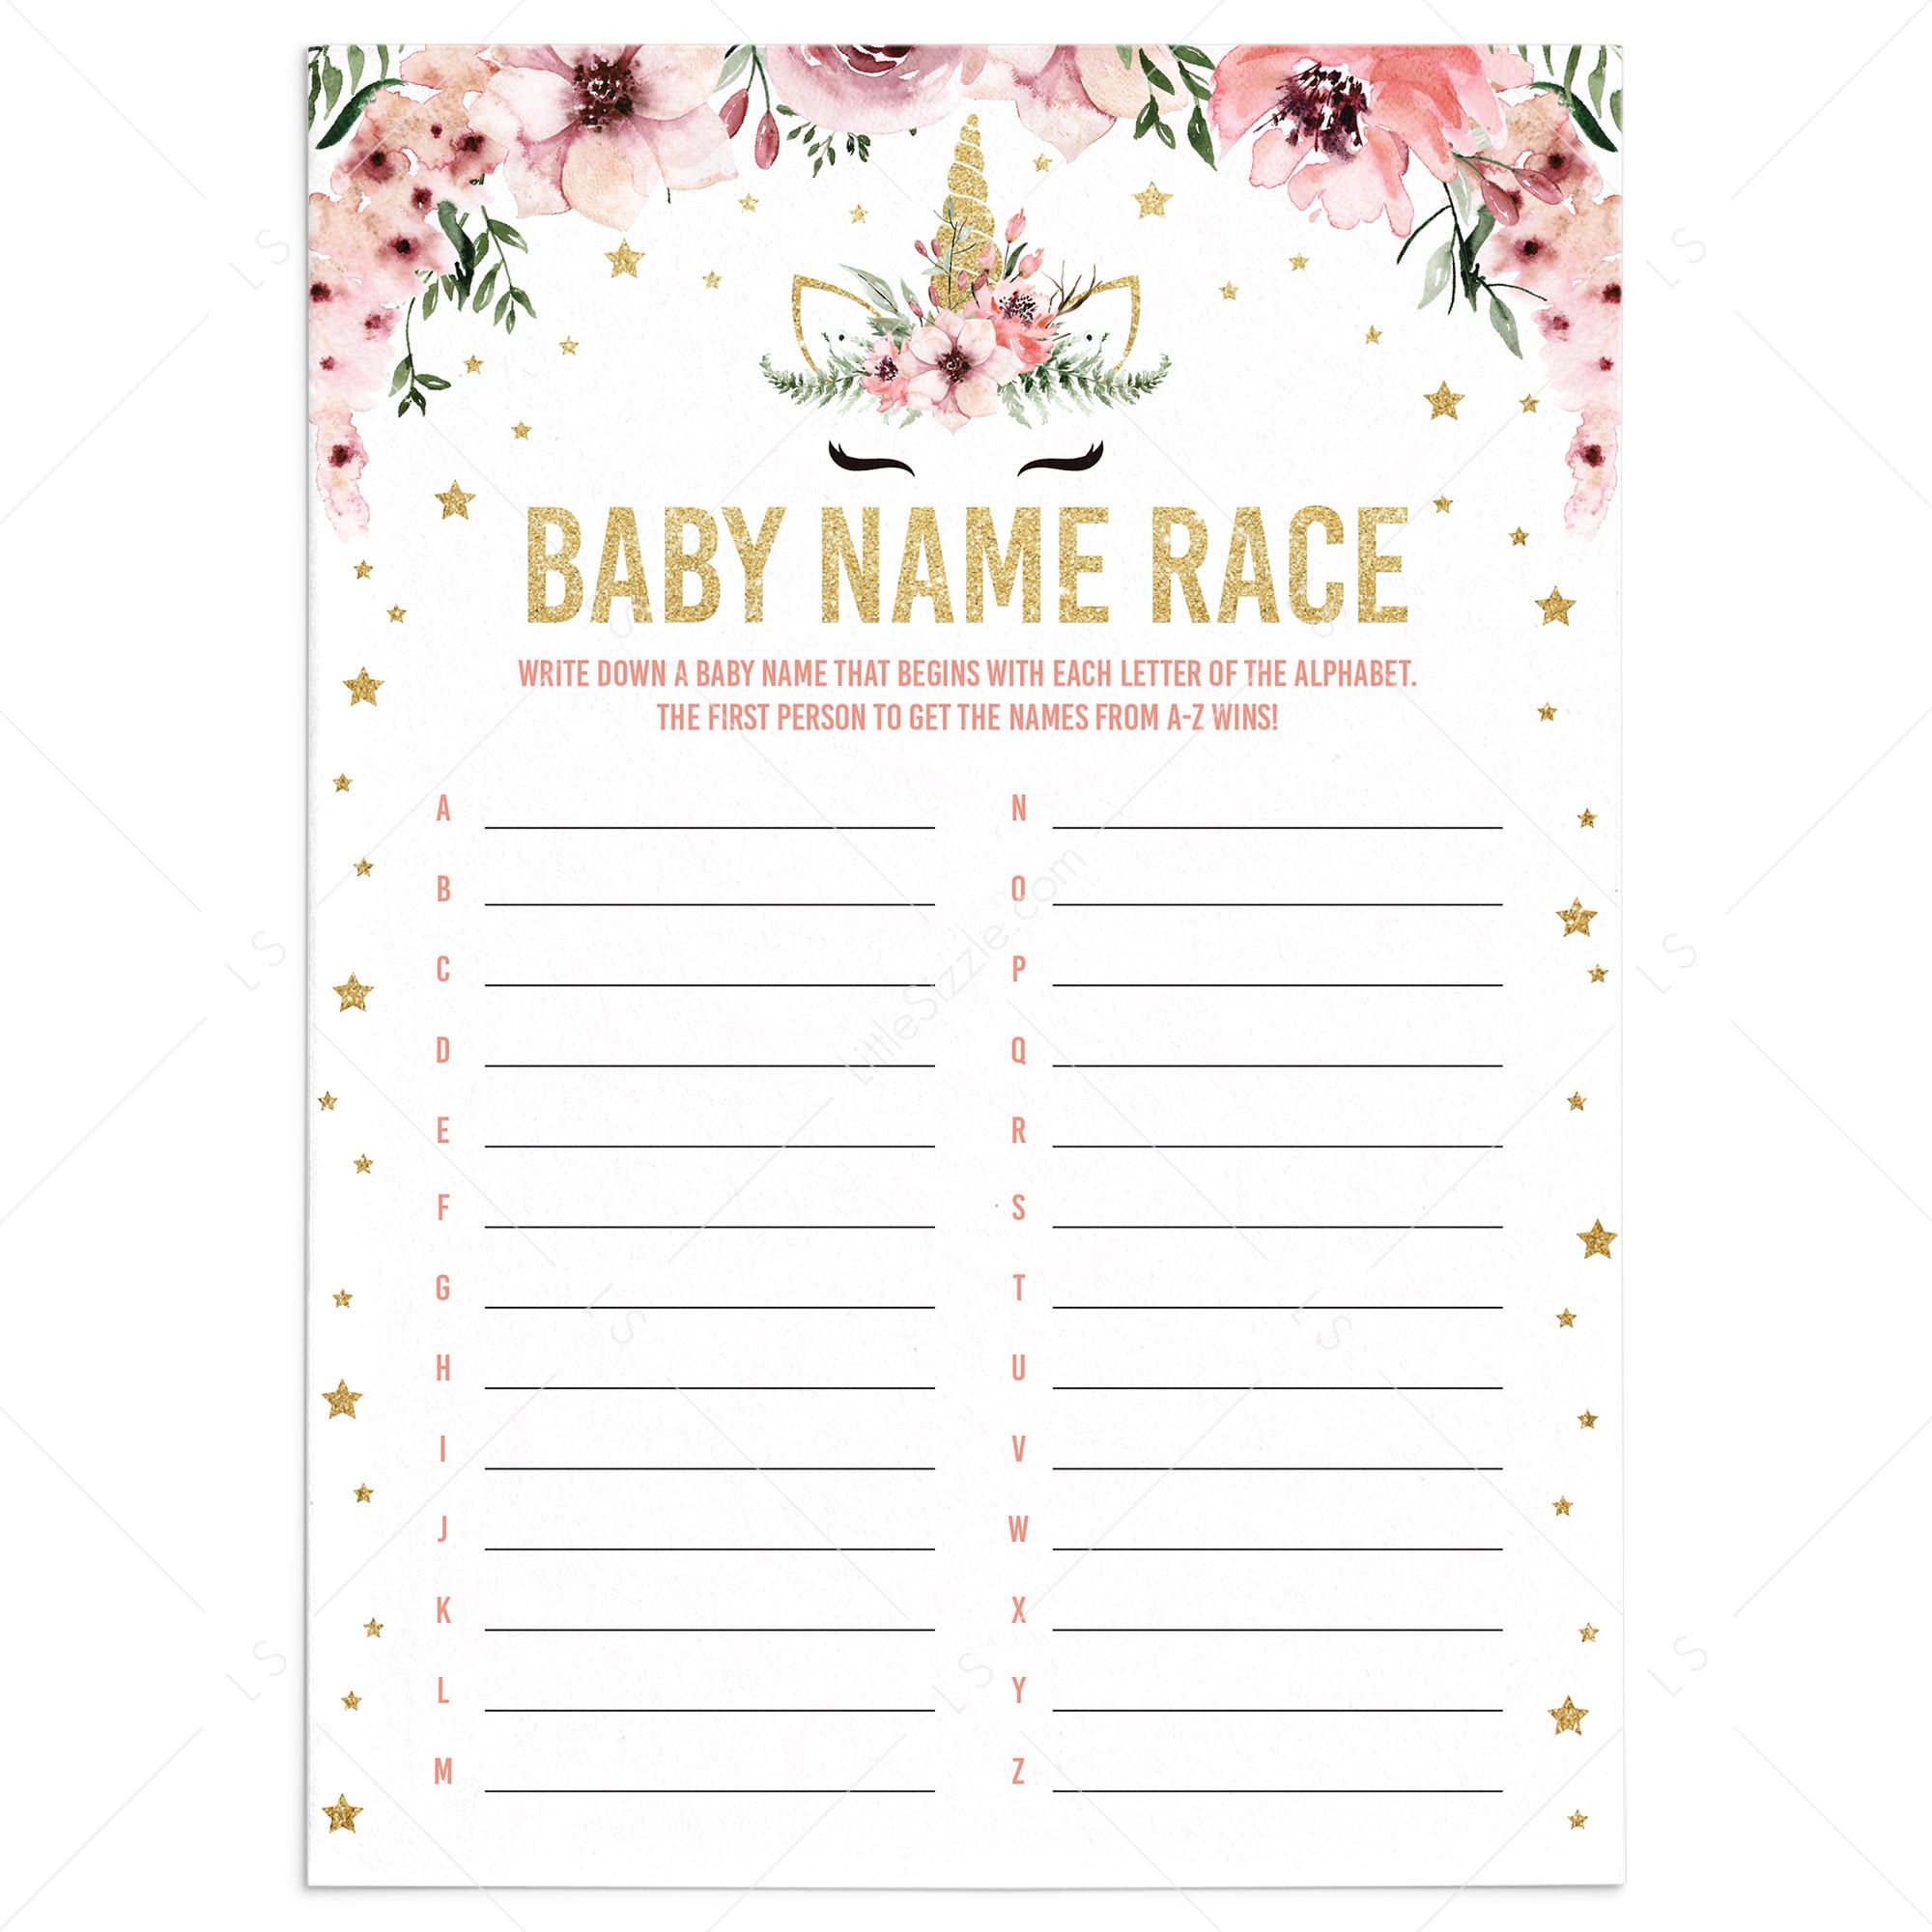 Baby Name Game for pink floral baby shower by LittleSizzle